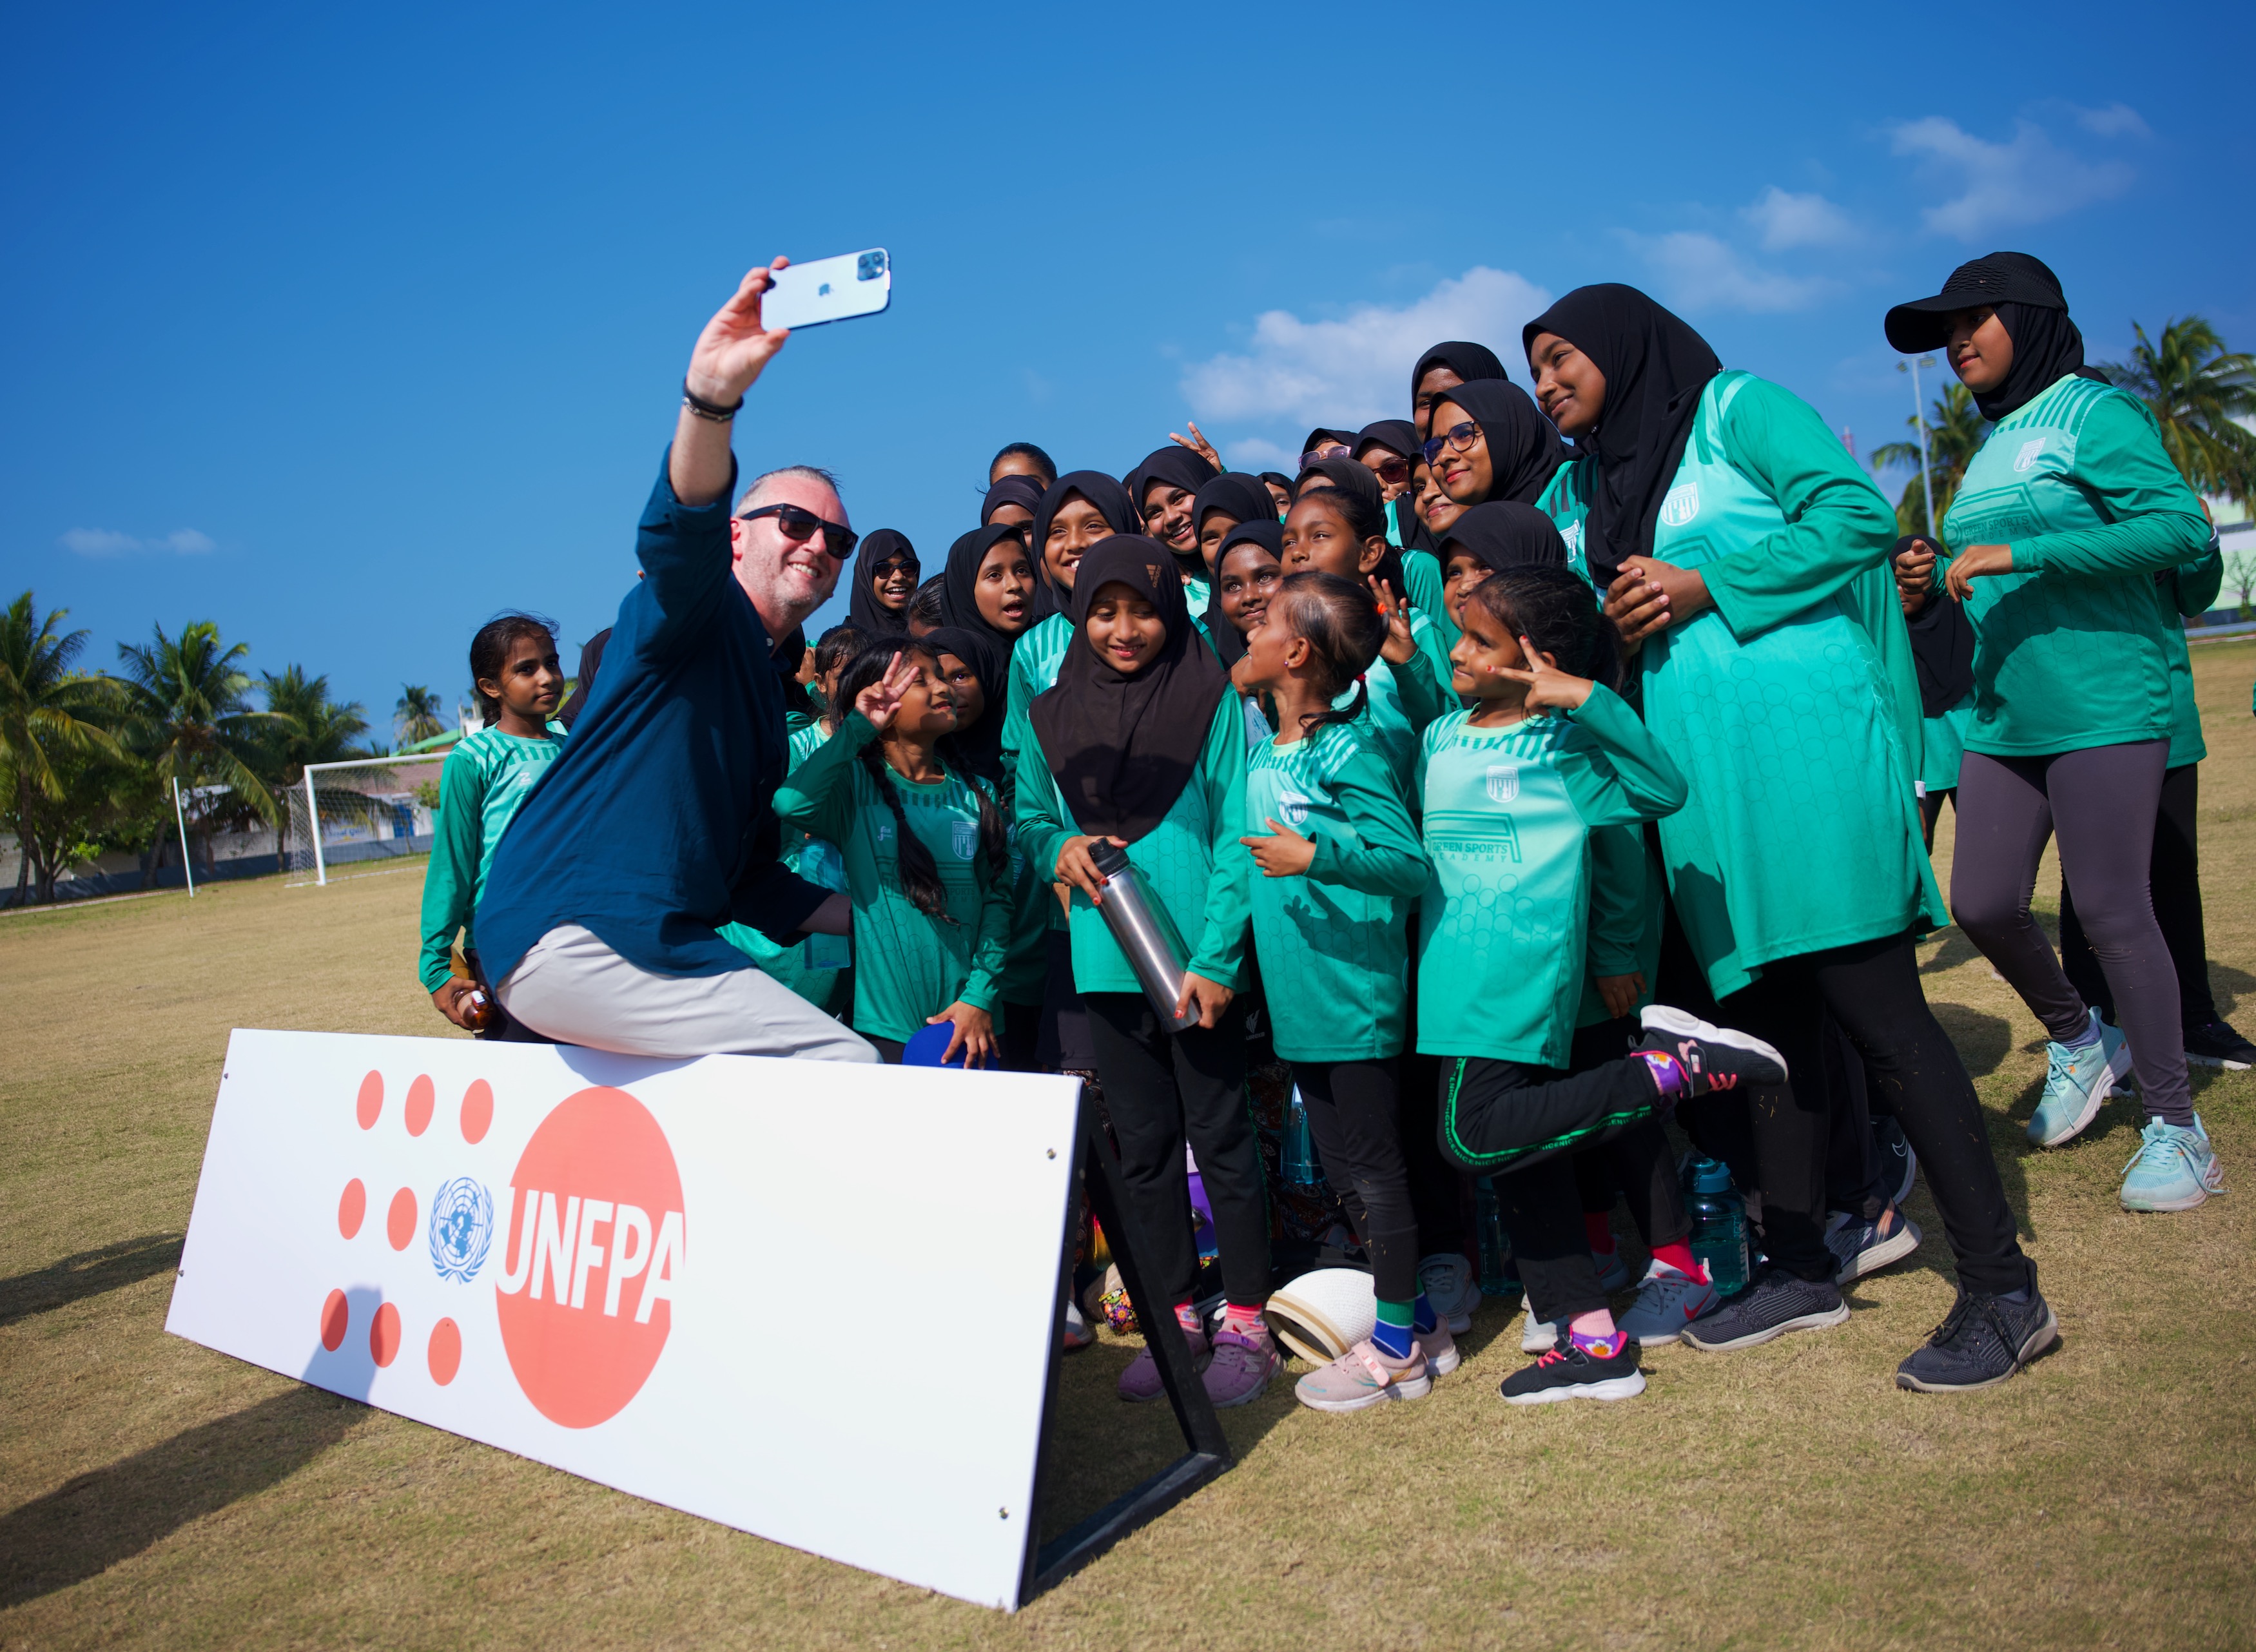 Regional Director for UNFPA Asia and the Pacific, Mr. Pio Smith, engages with young female athletes in Kulhudhuffshi during his recent visit to the Maldives (Photo: UNFPA Maldives)